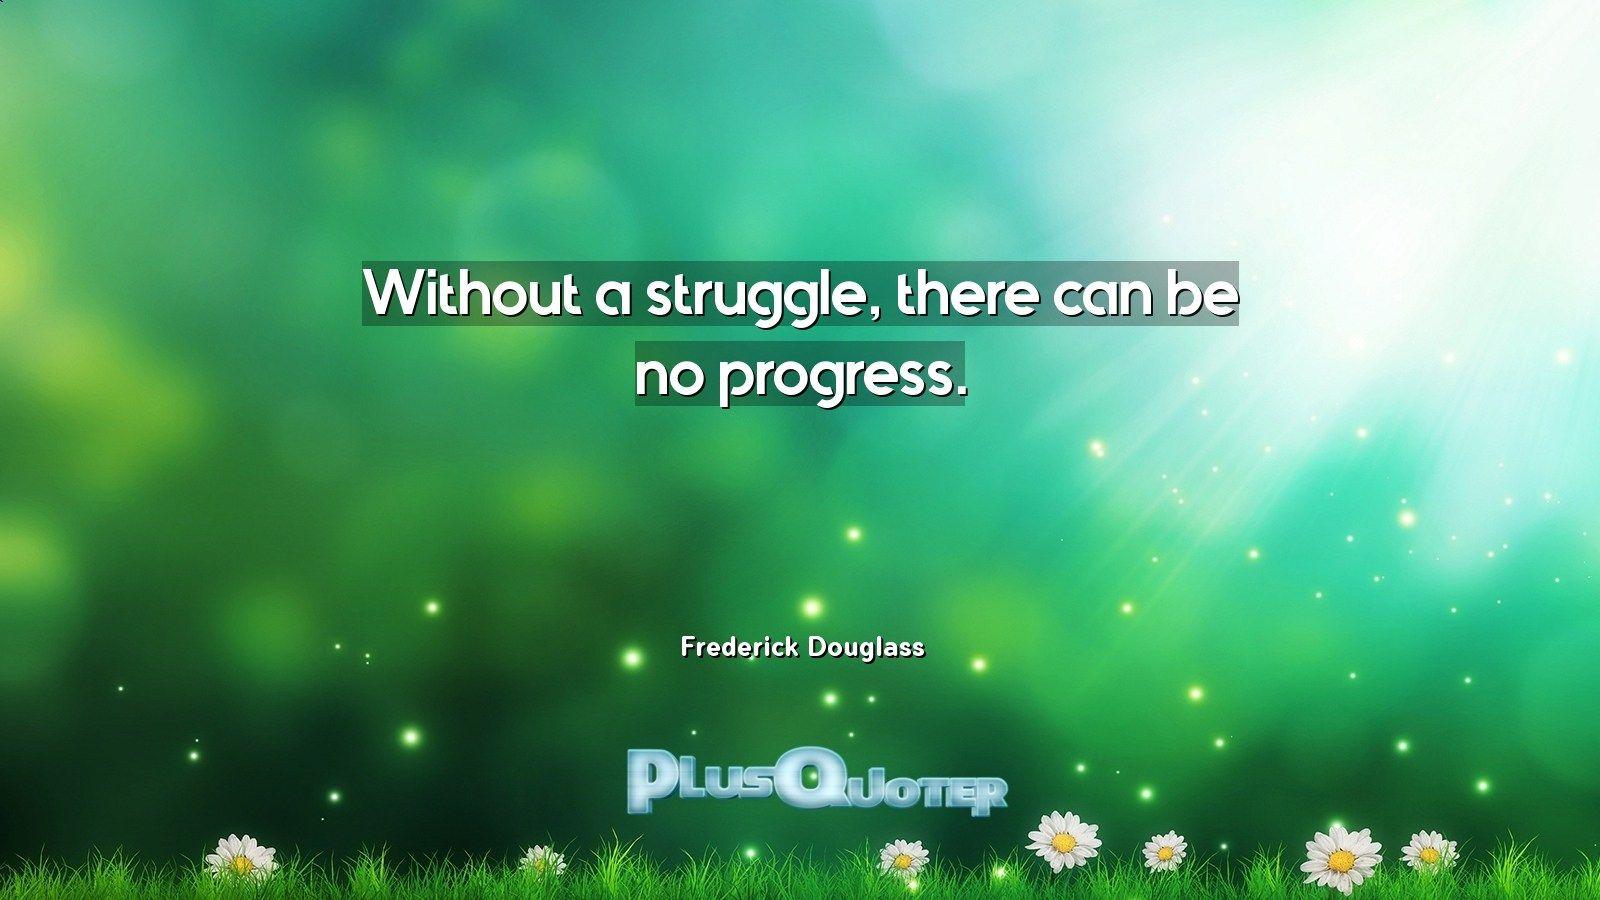 Without a struggle, there can be no progress- Frederick Douglass